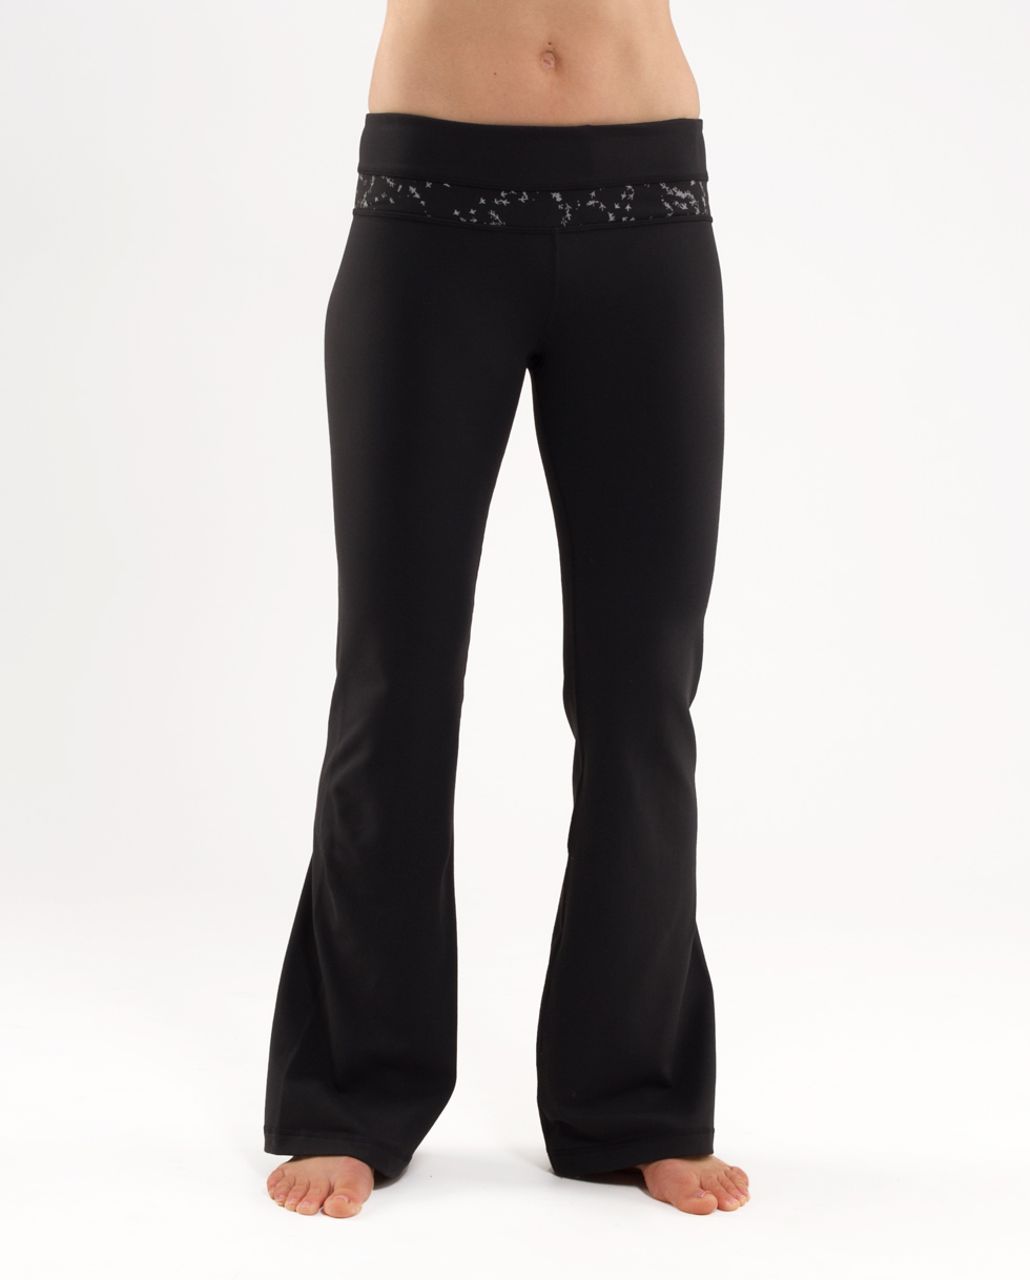 Lululemon Groove Pant (Tall) - Black /  Silver Pitter Patter Reflective